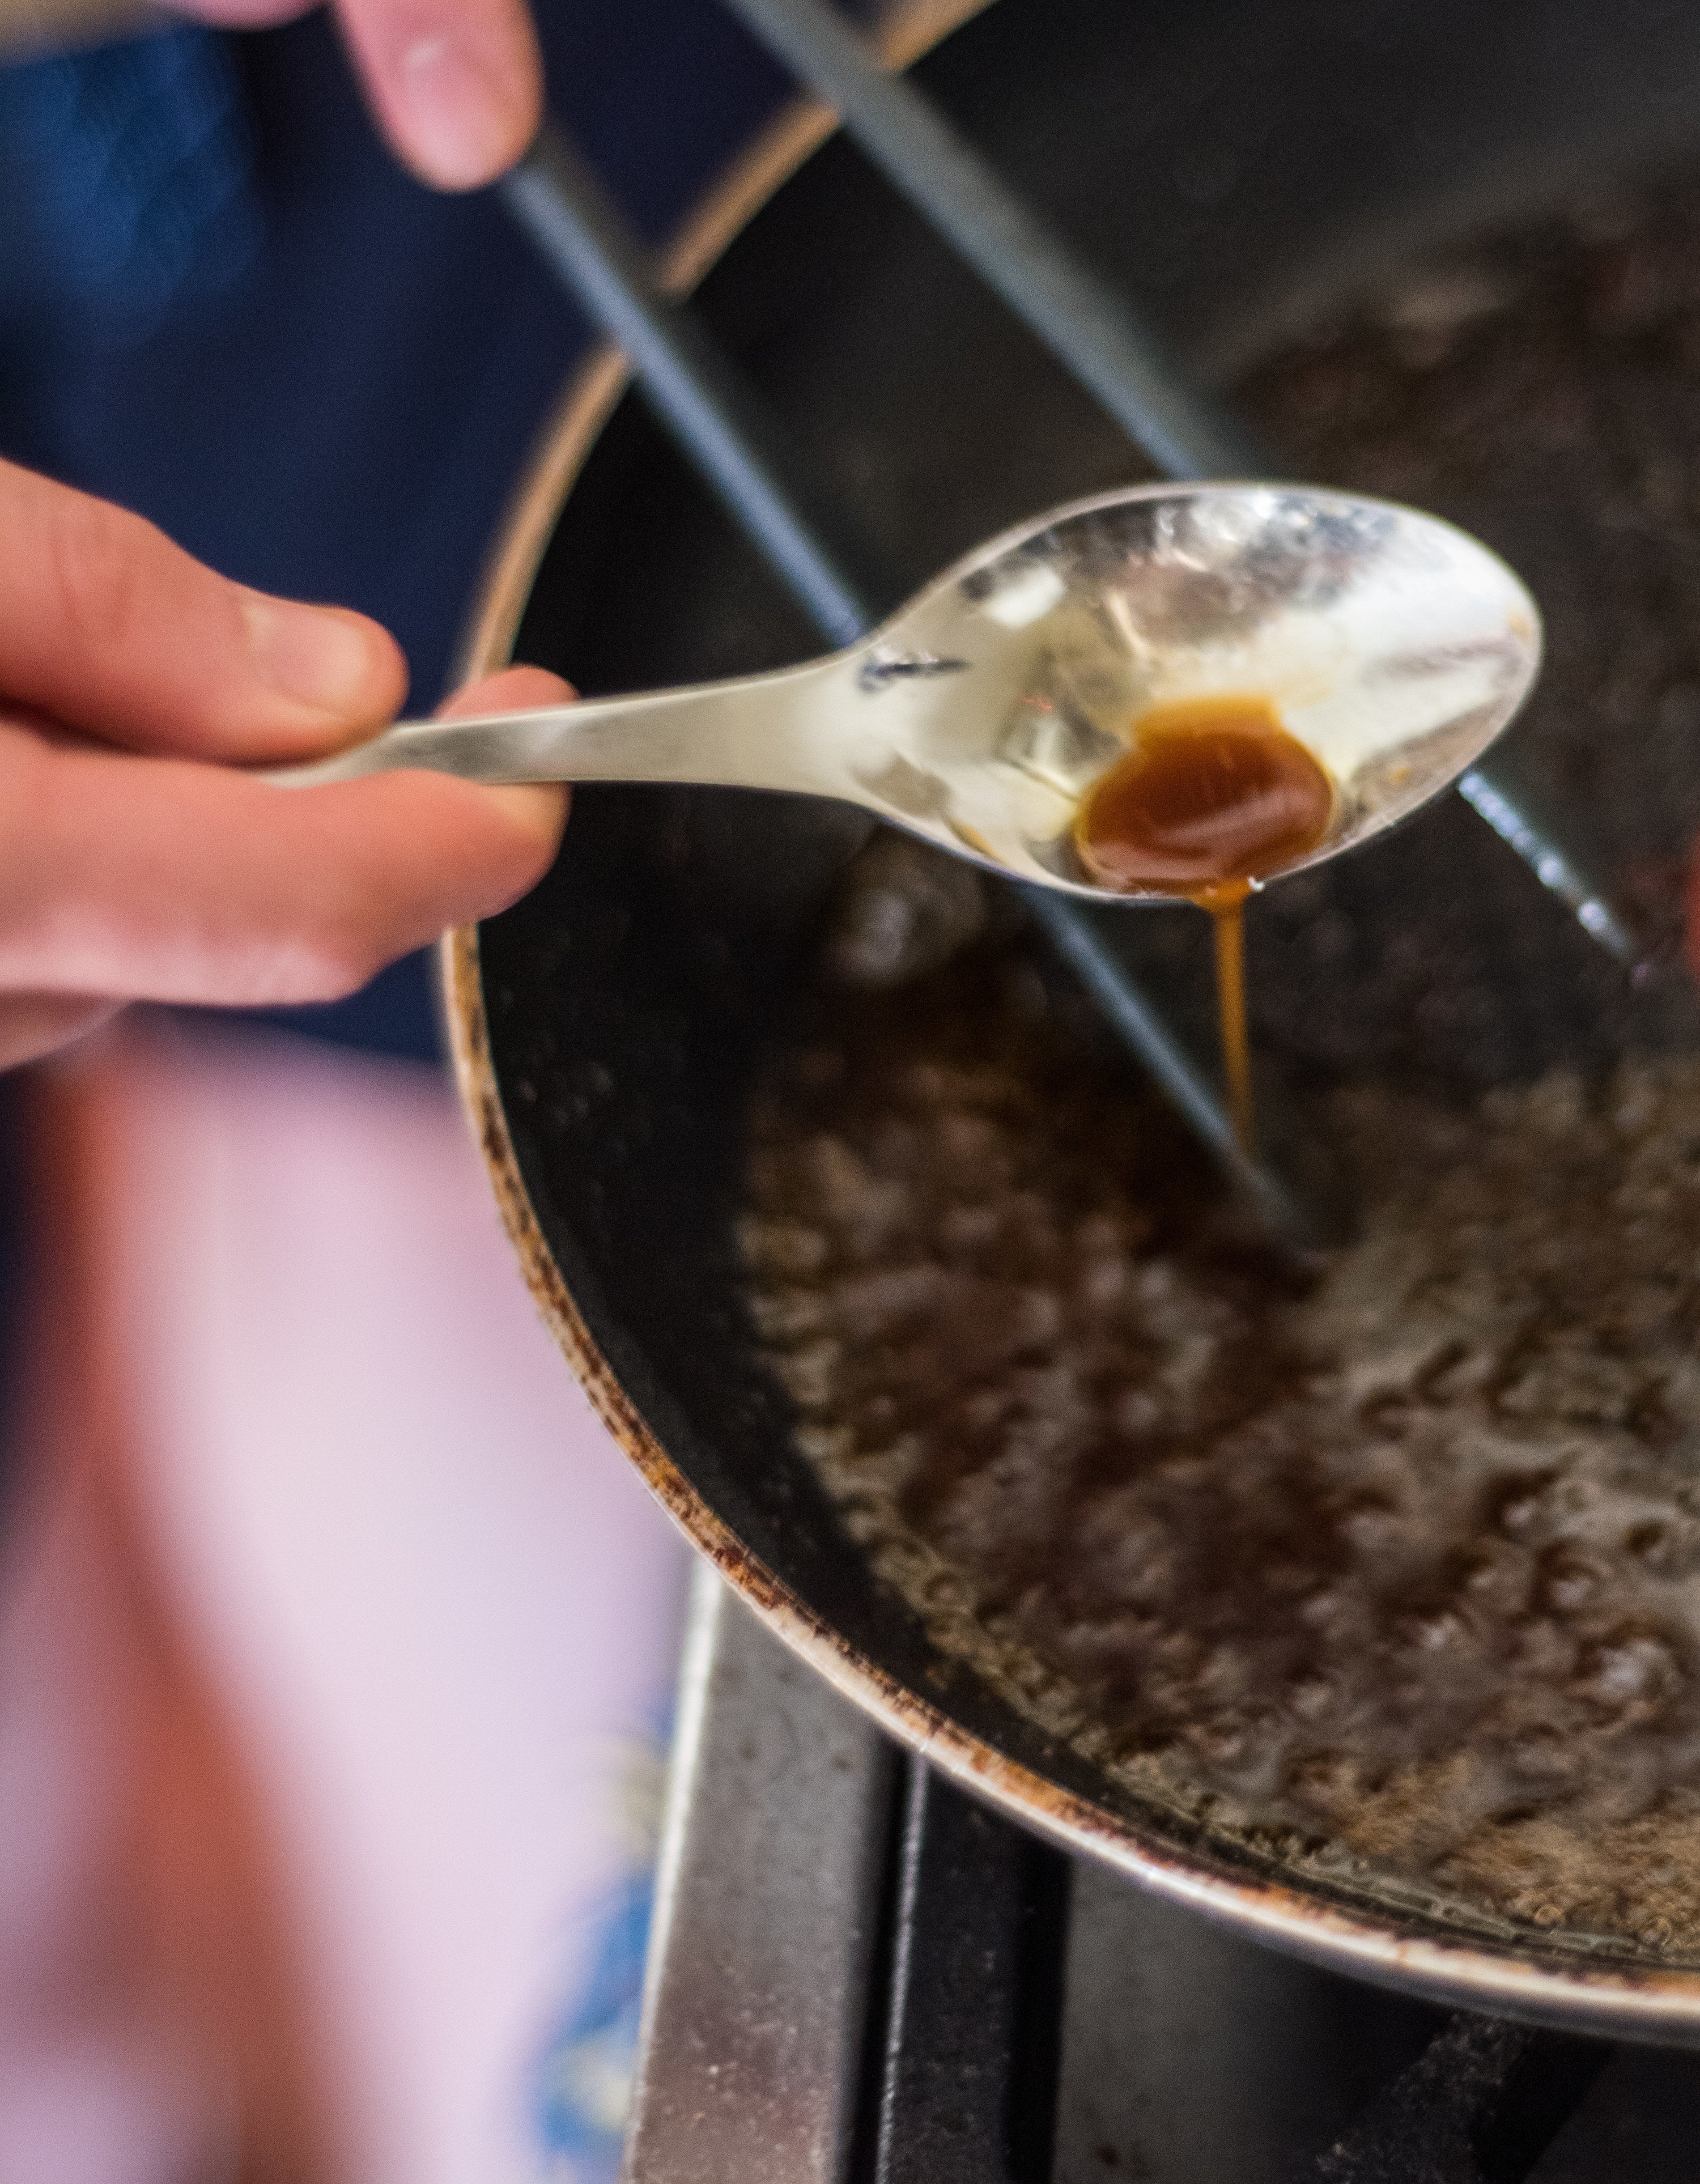 Worcestershire sauce being poured into a pan